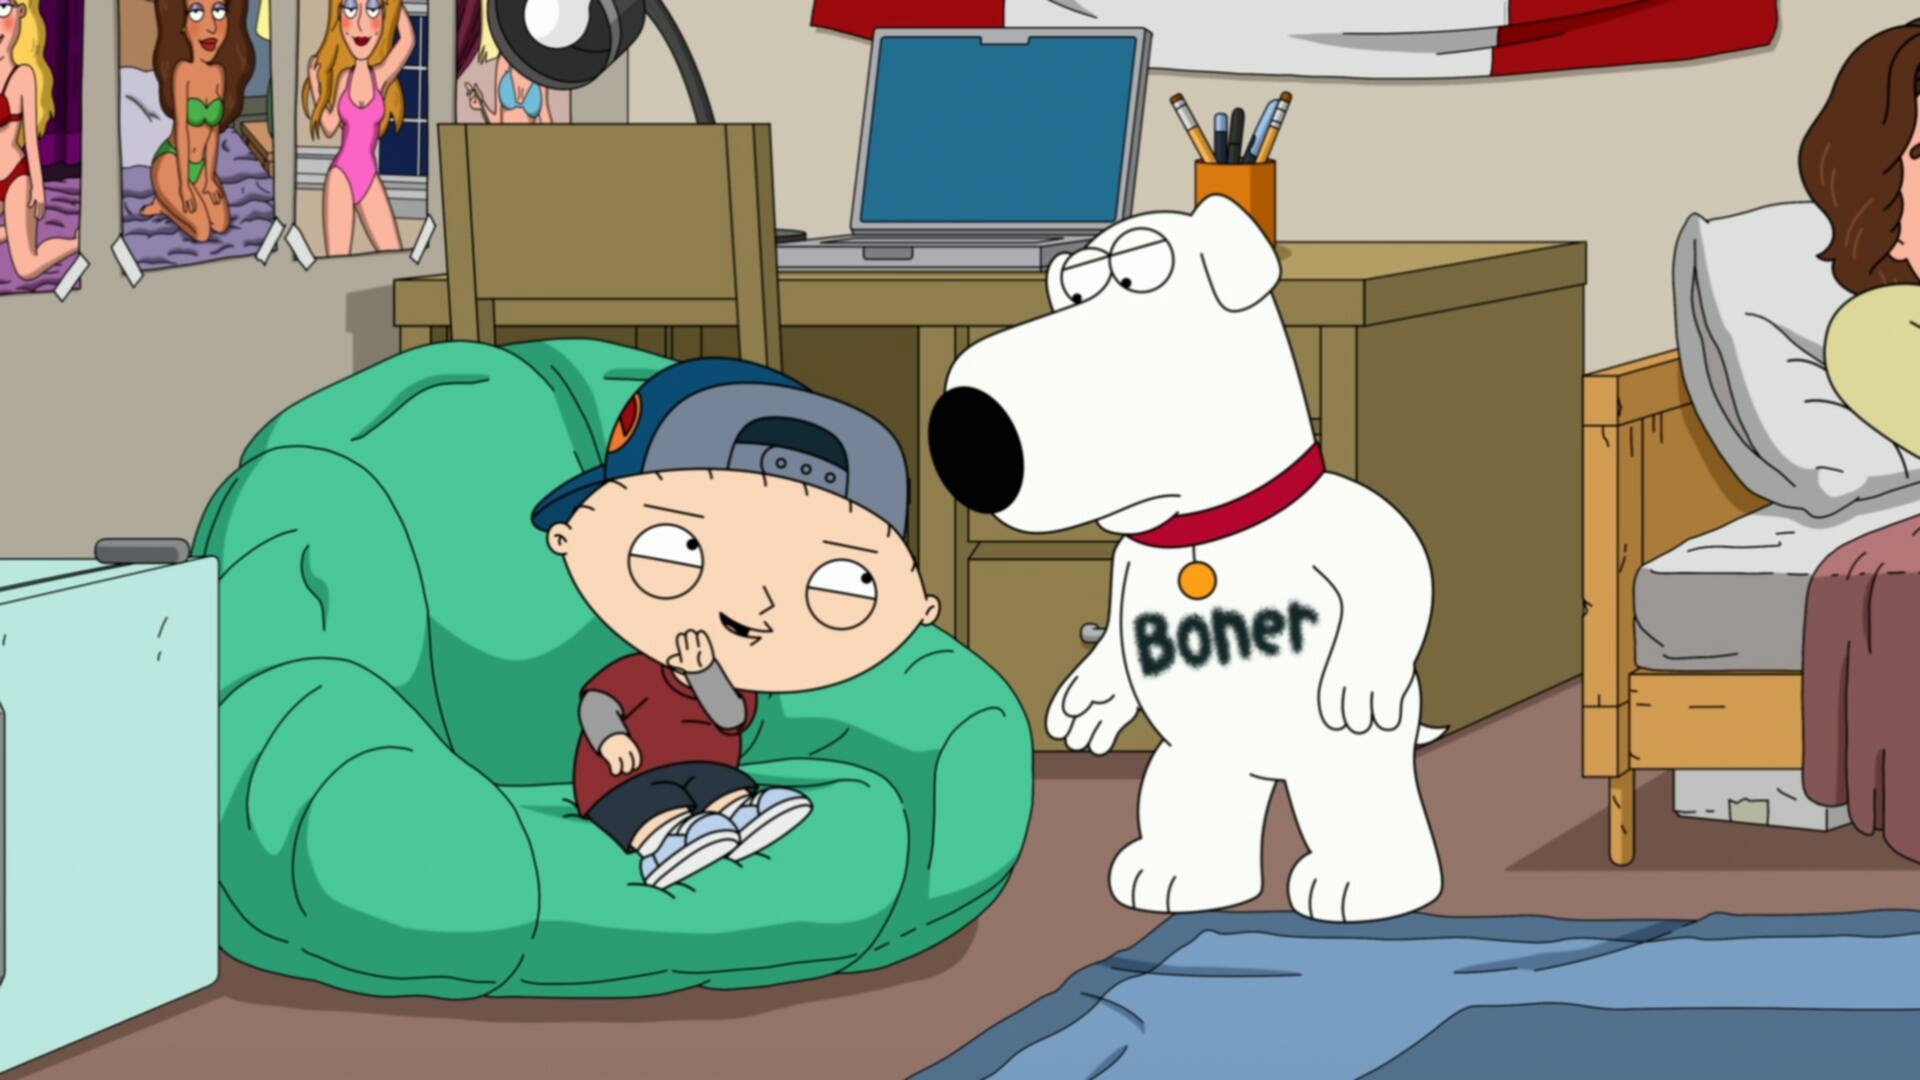 Family Guy S22E05 Baby Its Cold Inside 1080p DSNP WEB DL DDP5 1 H 264 NTb TGx